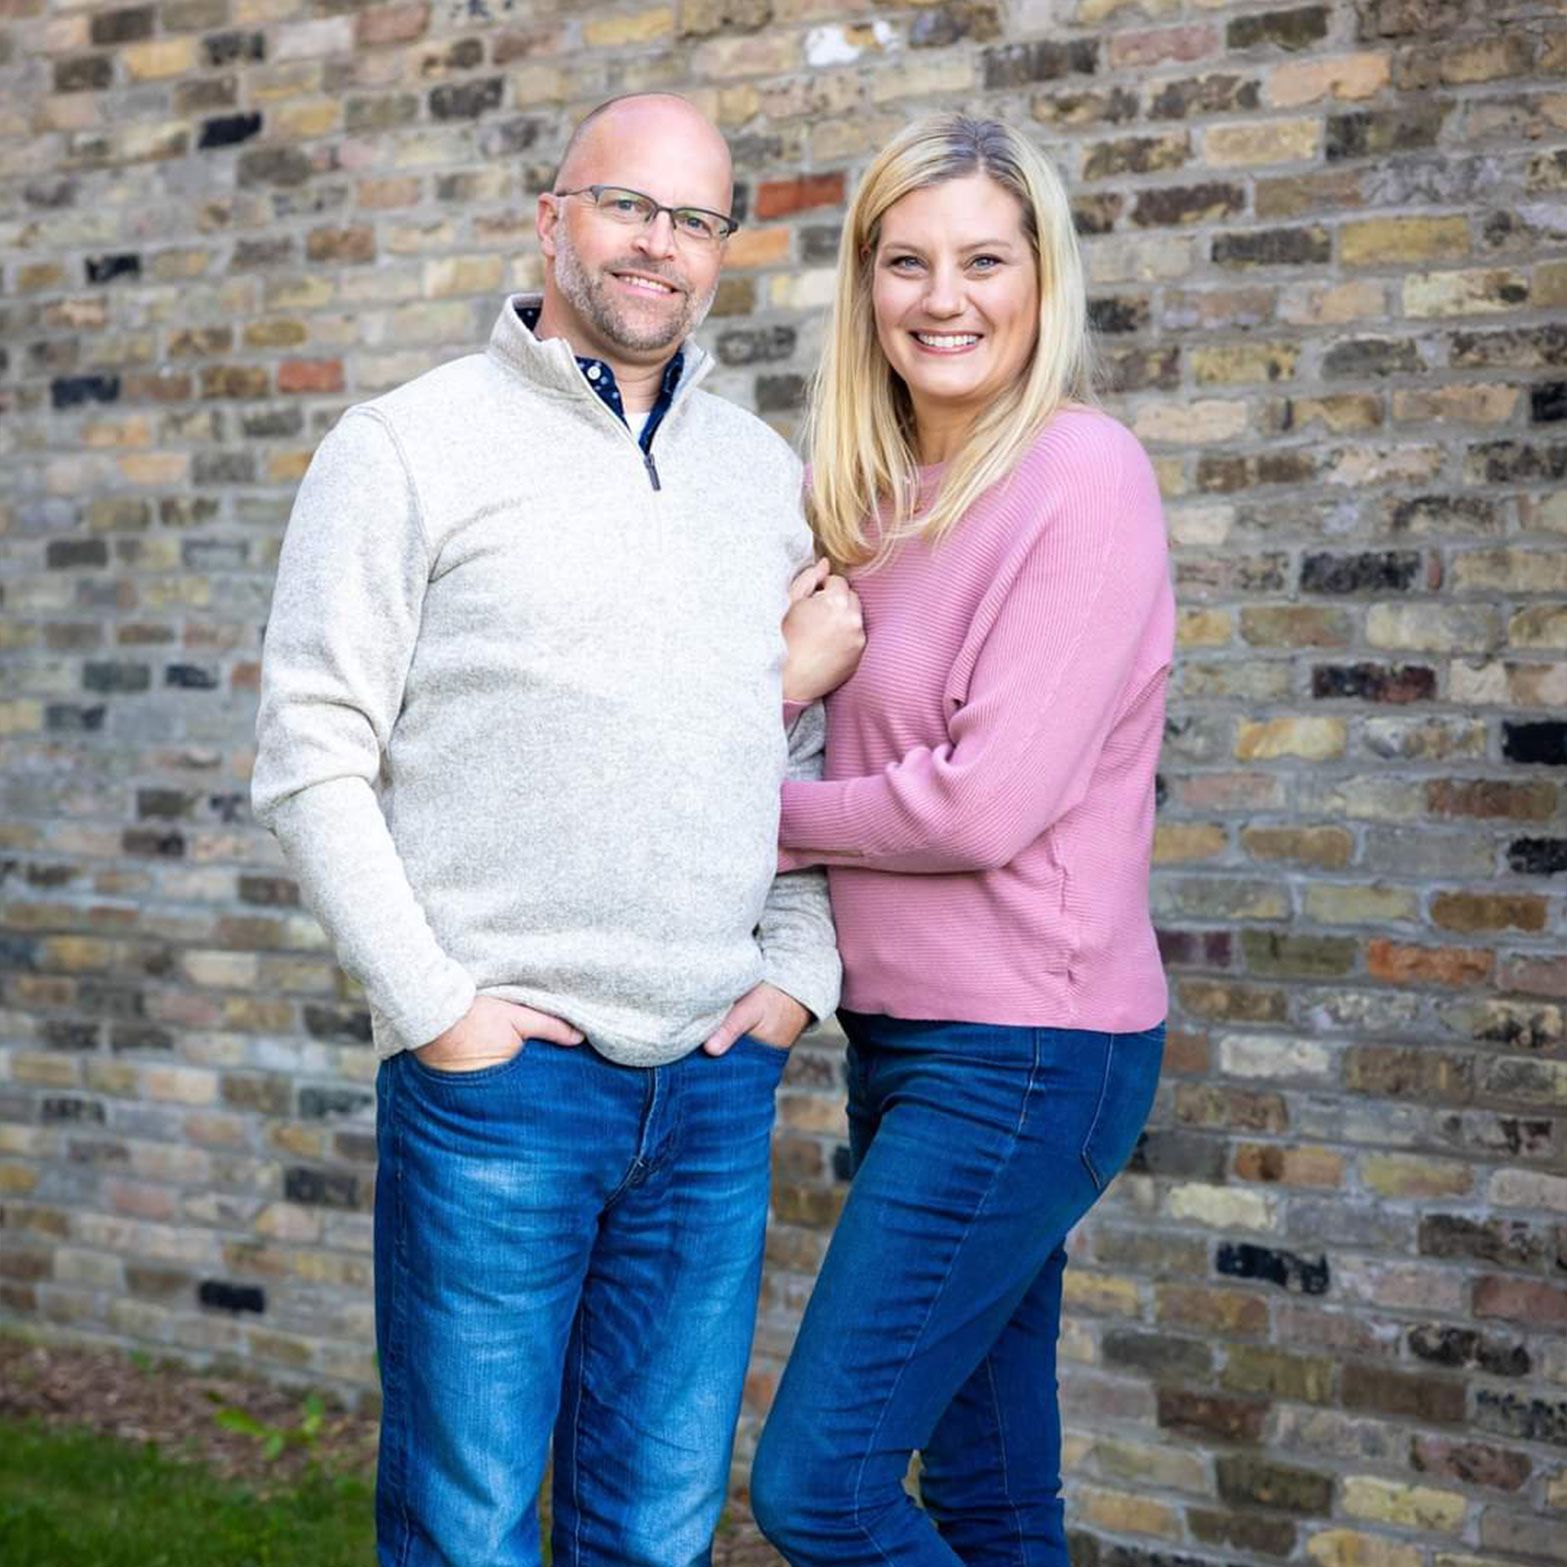 a man and a woman are posing for a picture in front of a brick wall .